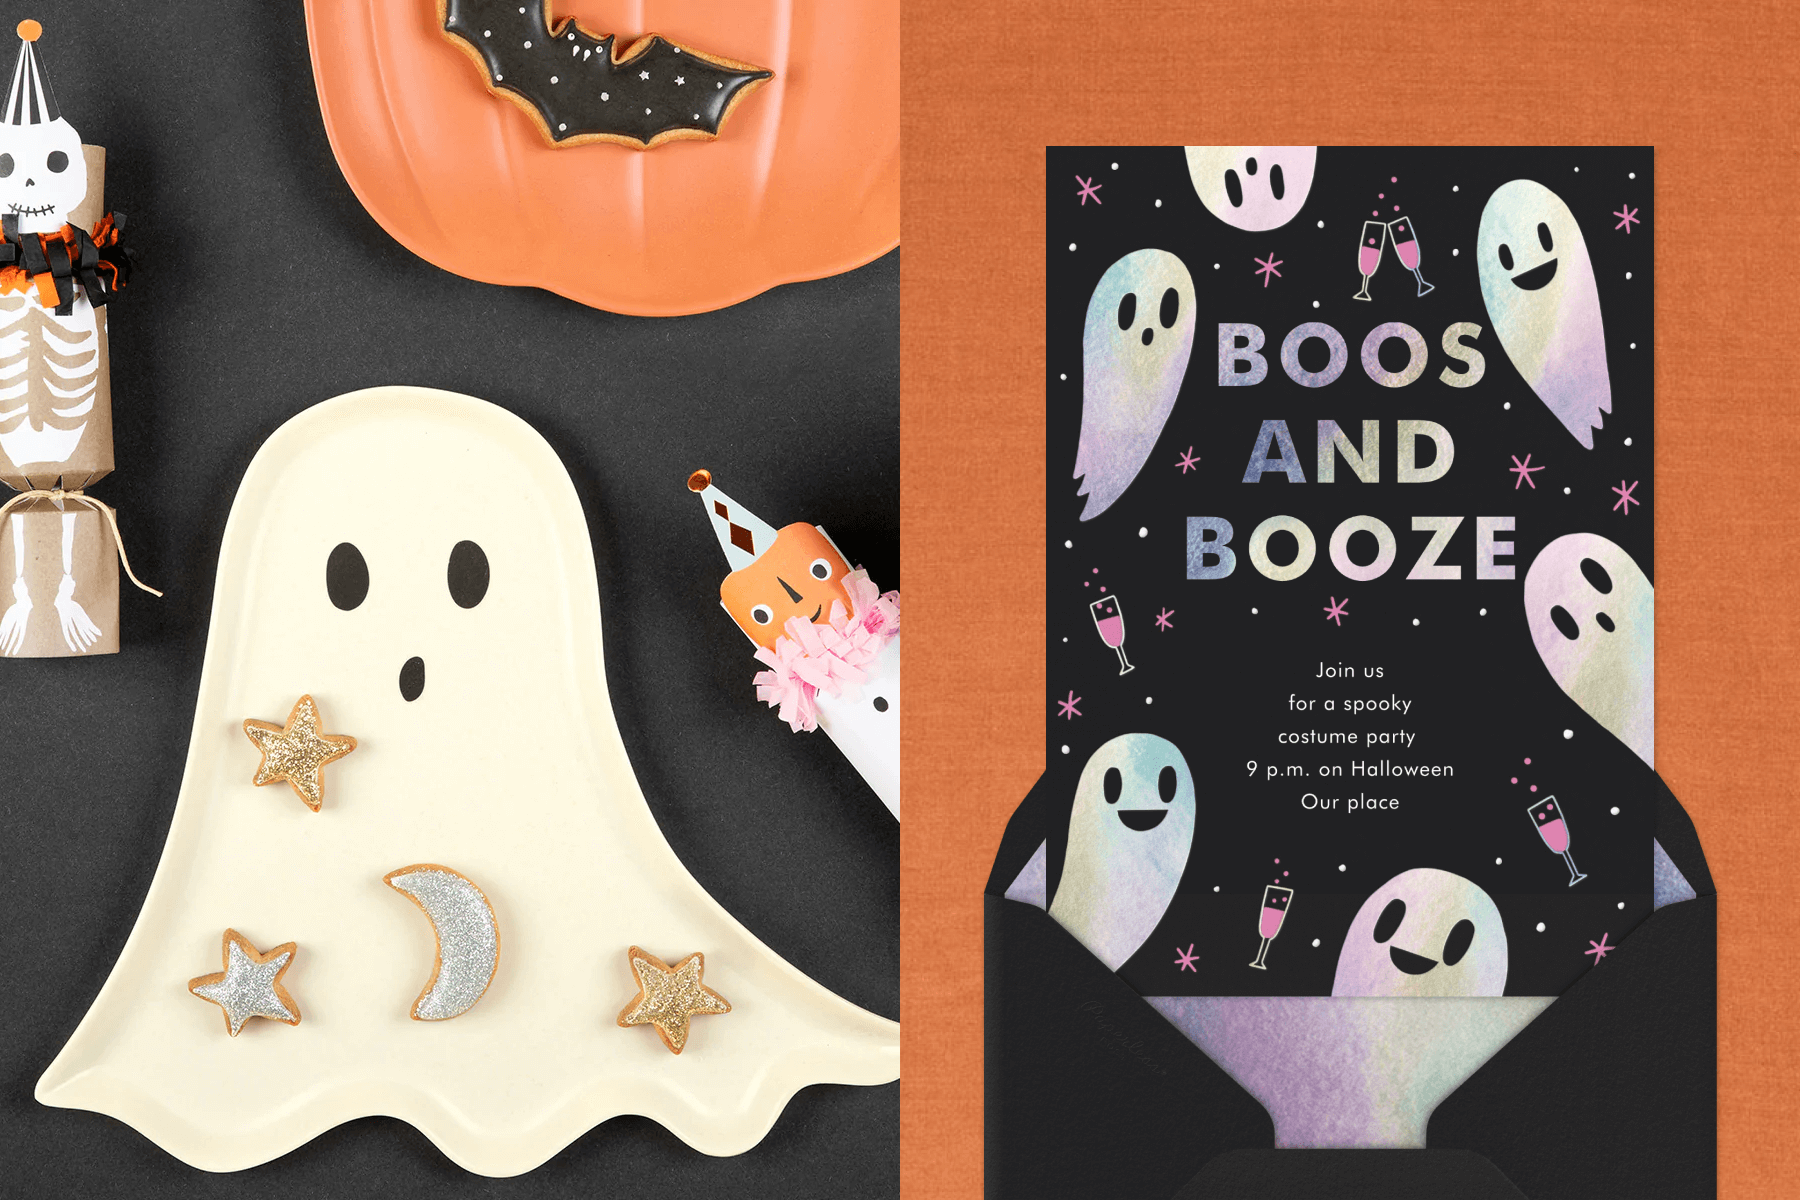 Left: A plate shaped like a ghost has moon and star-shaped cookies on it. Right: An invitation for Boos and Booze has friendly looking ghosts on a black background with pink stars and small Champagne glasses clinking.